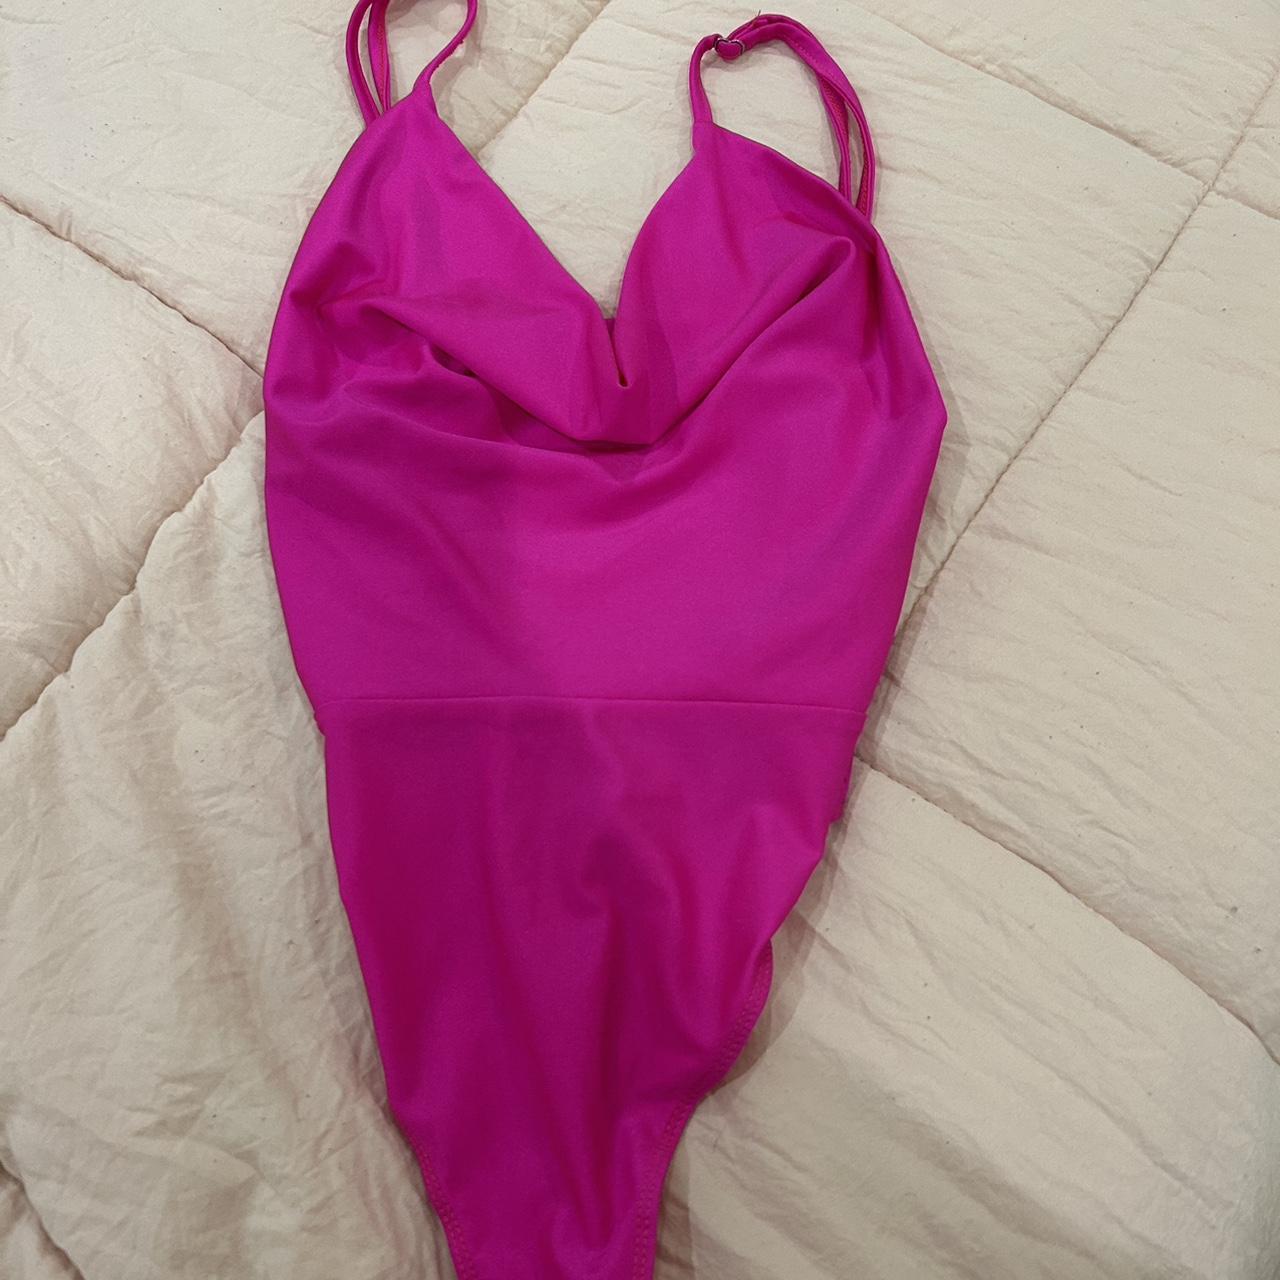 Hot pink bodysuit from a boutique - Depop